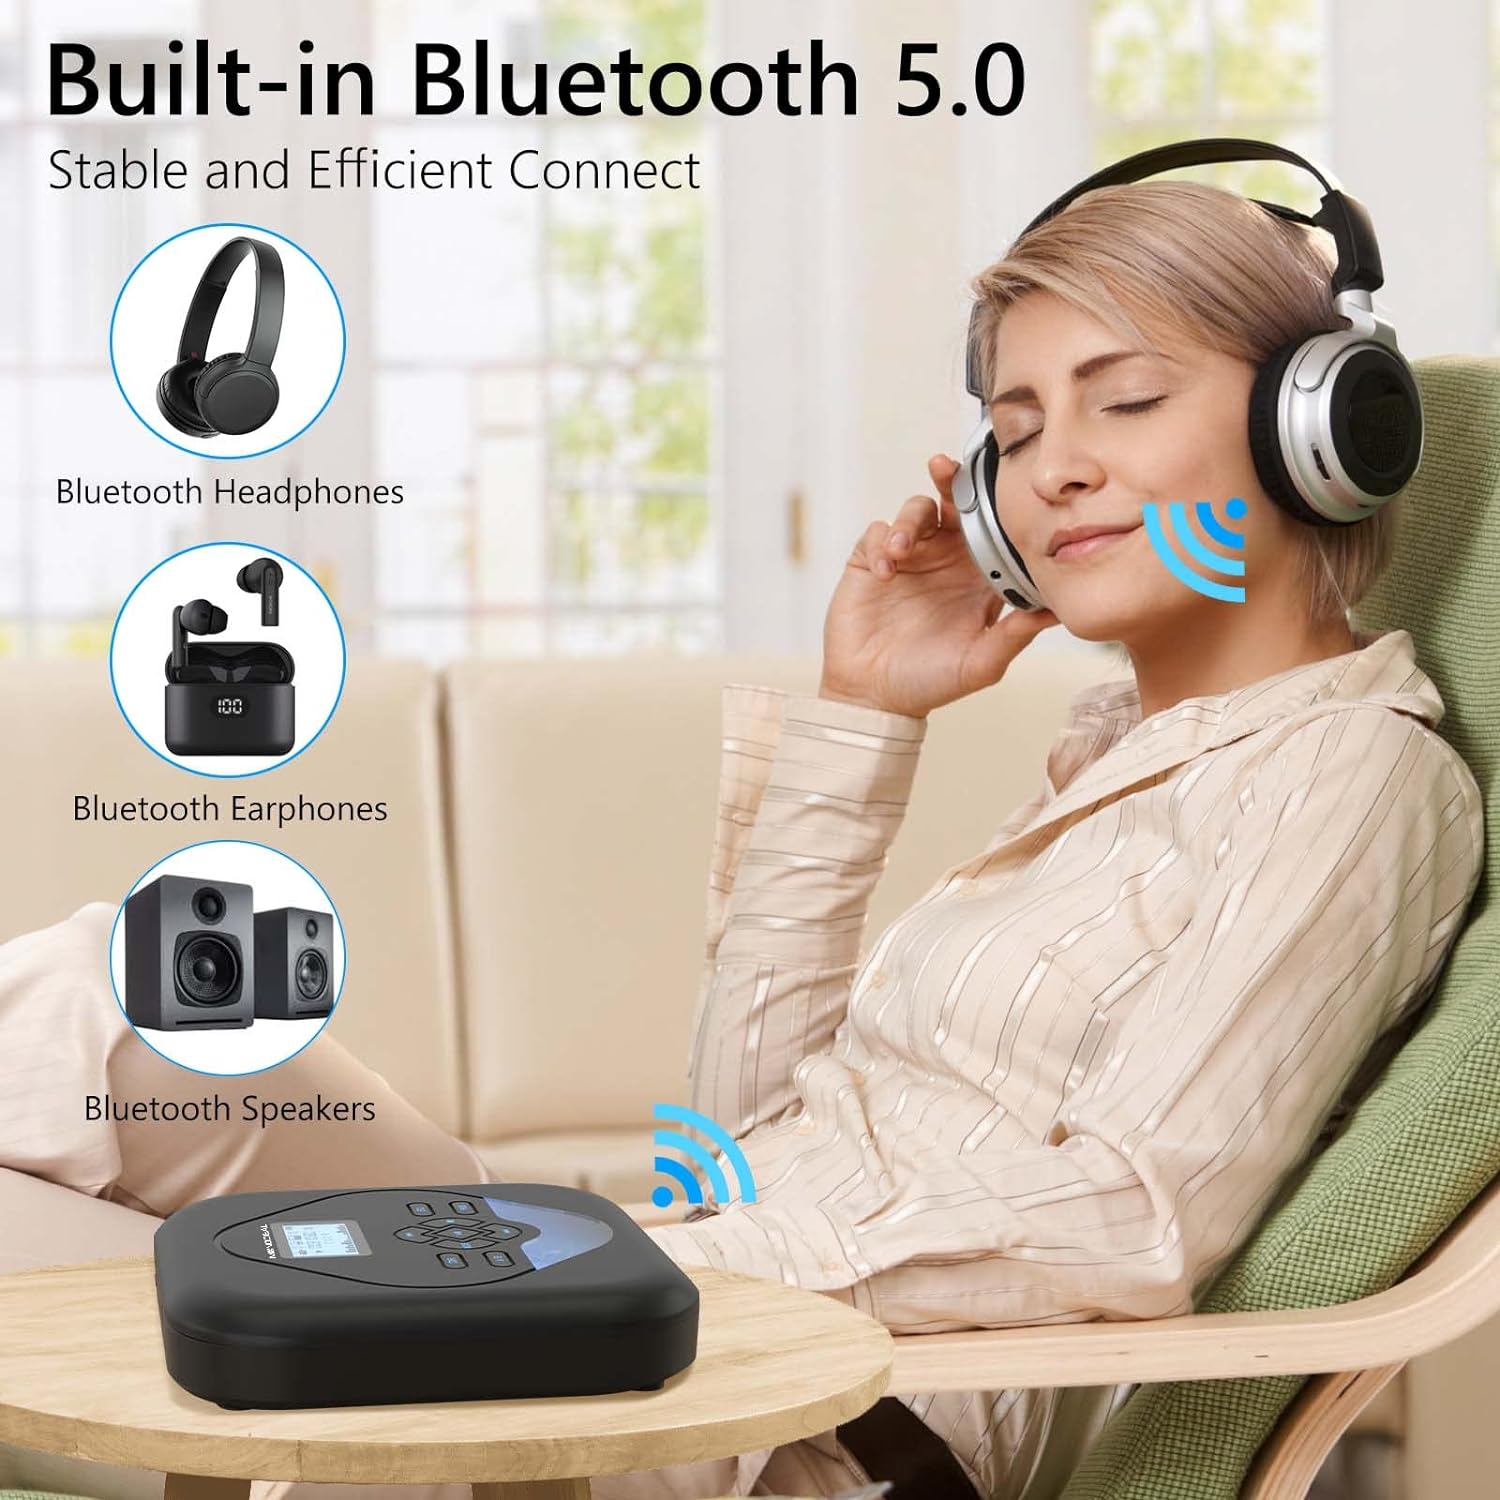 MONODEAL CD Player Portable,Bluetooth CD Player with Speakers,Rechargeable Walkman CD Player for Car and Home,Small Anti-Skip CD Player with Dual Headphone Jacks,WAV/FLAC/MP3/CD Compatible